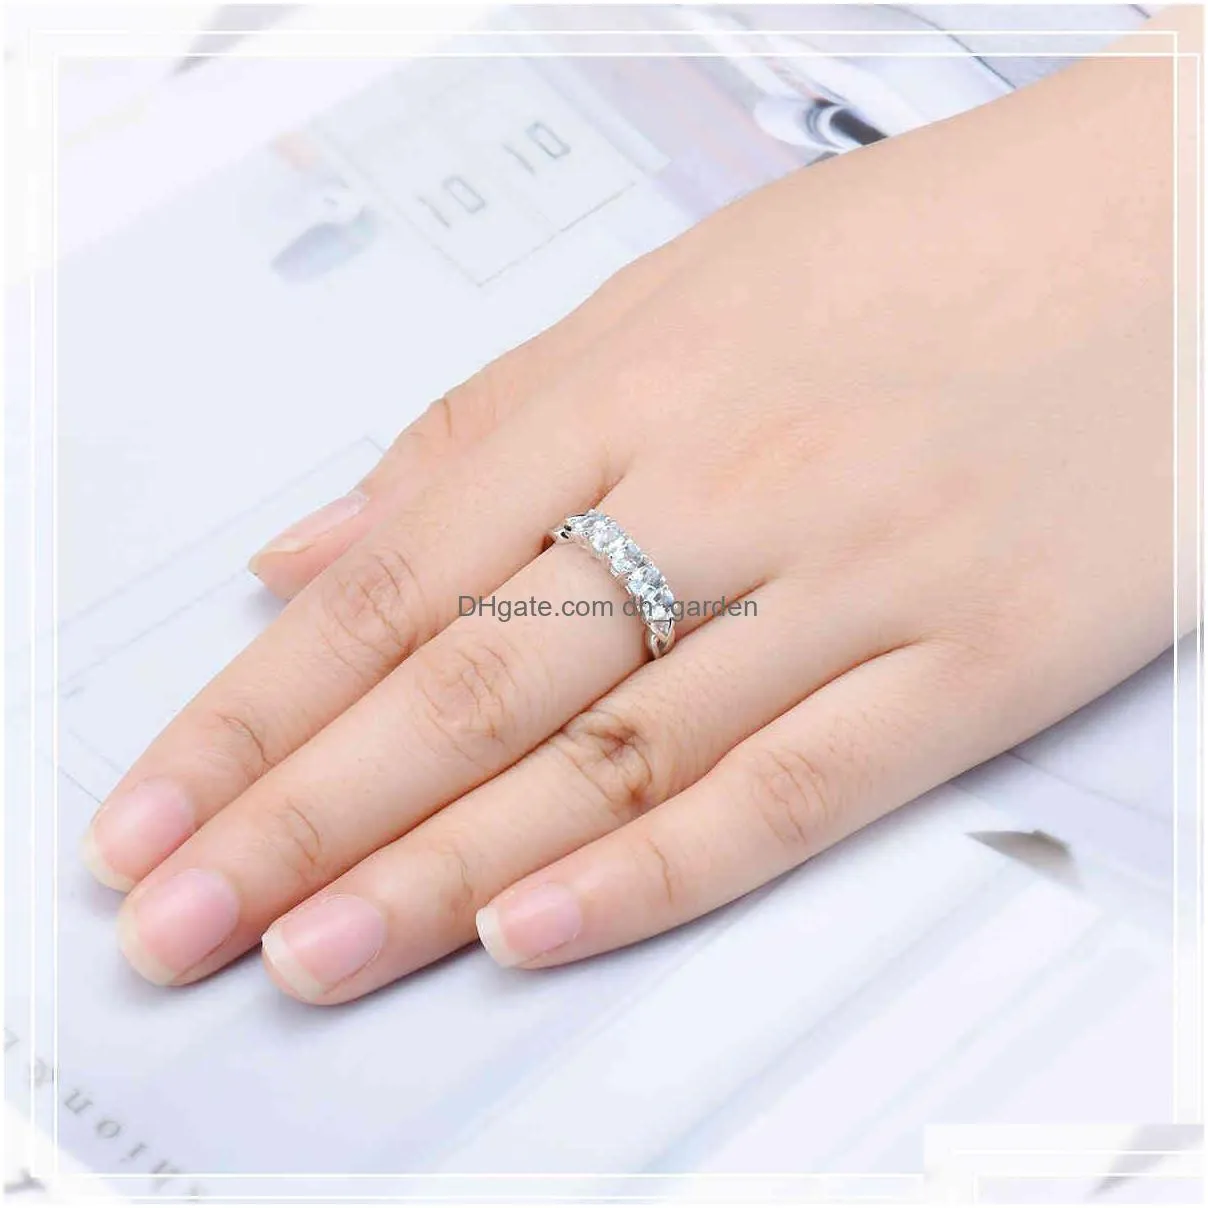 natural aquamarine 0.81ct crown wedding ring solid 925 sterling silver gemstone rings fine elegant jewelry for women